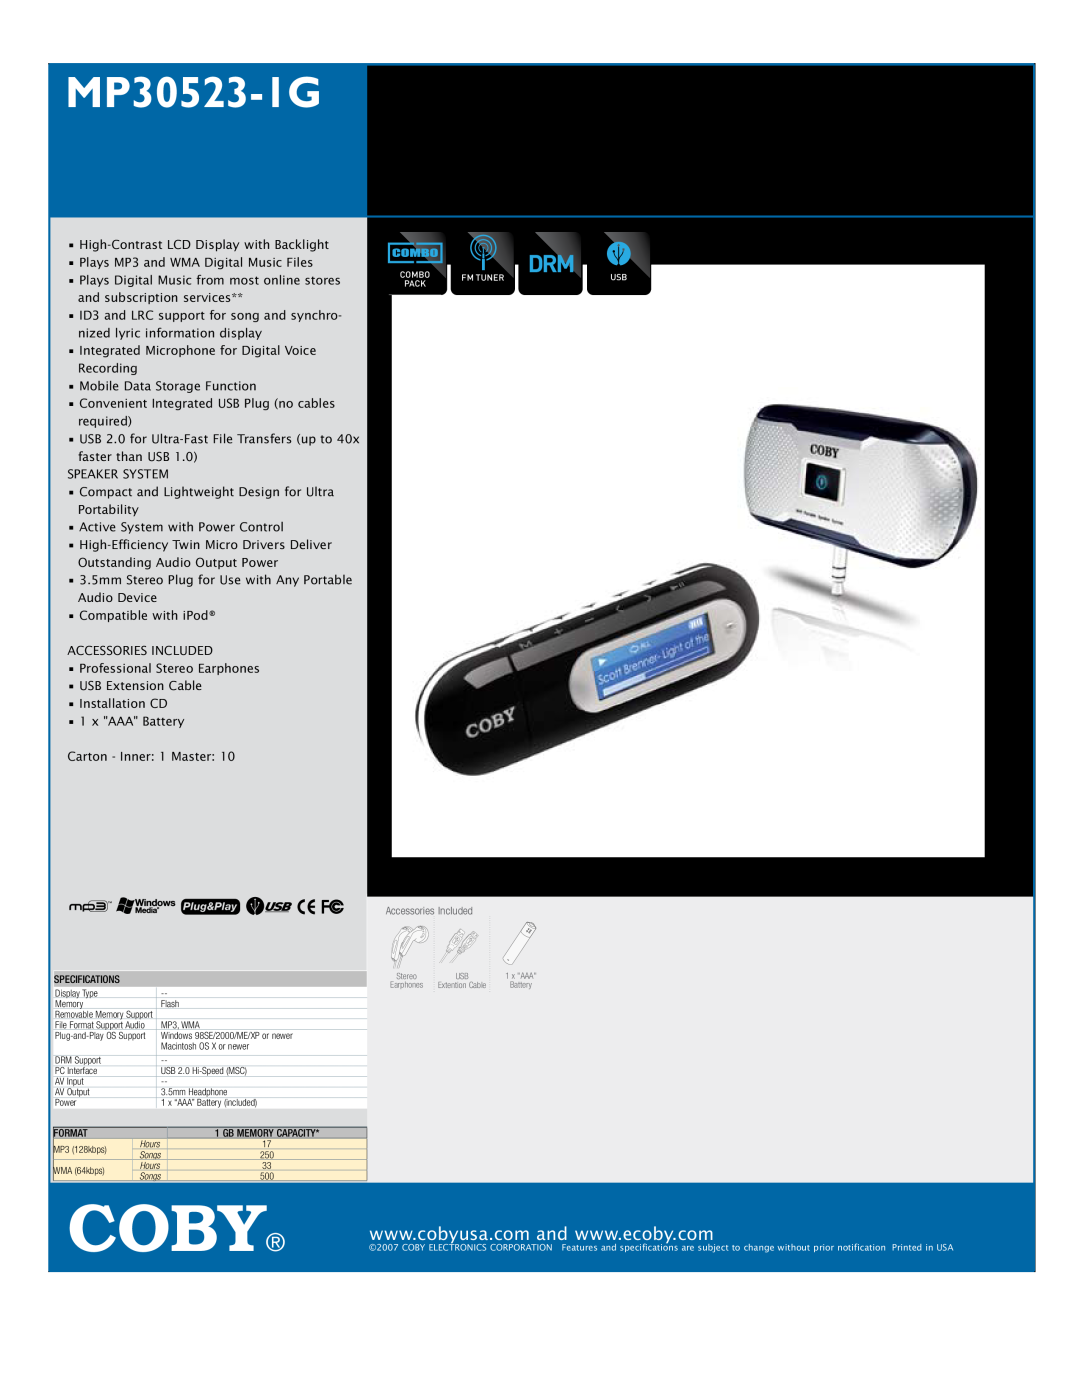 COBY electronic MP30523-IG specifications Coby, MP30523-1G USB-Stick MP3 Player with Stereo Speaker System 